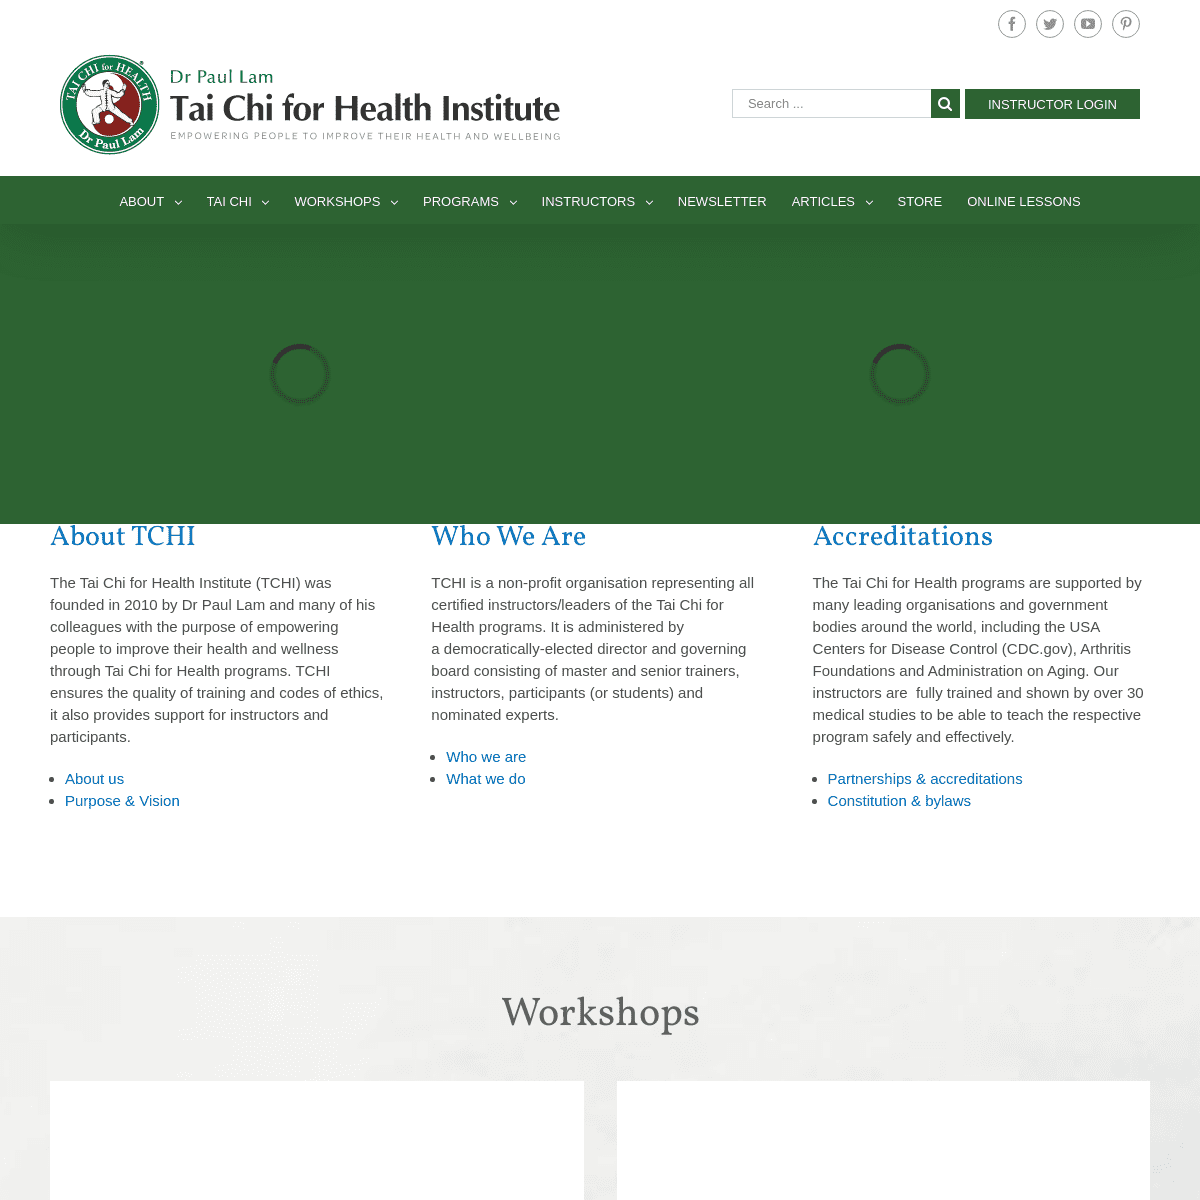 A complete backup of https://taichiforhealthinstitute.org